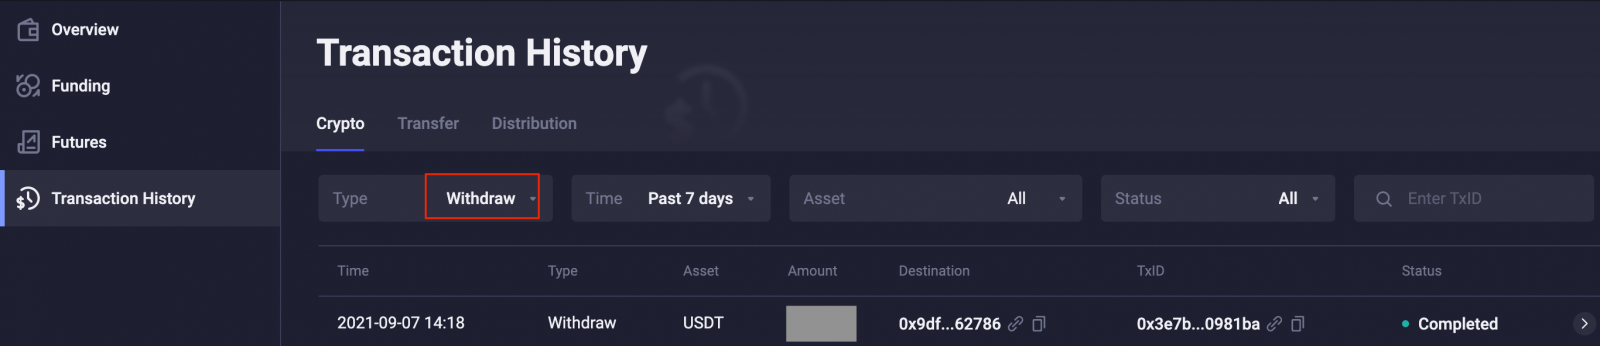 How to Sign in and Withdraw from ApolloX